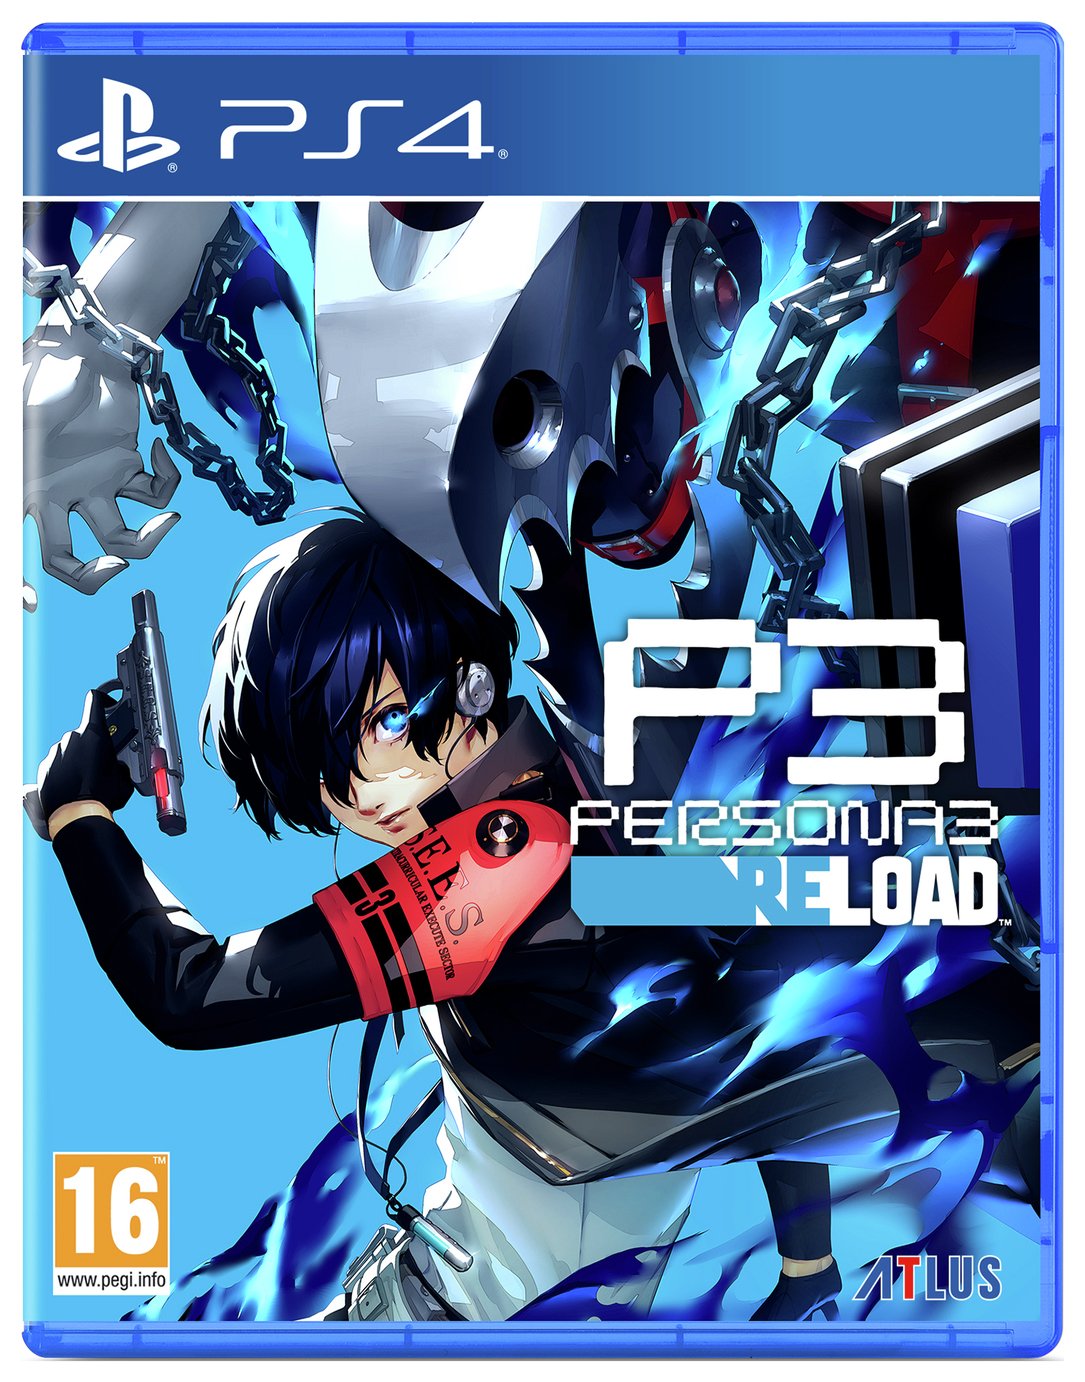 Persona 3 Reload PS4 Game Pre-Order